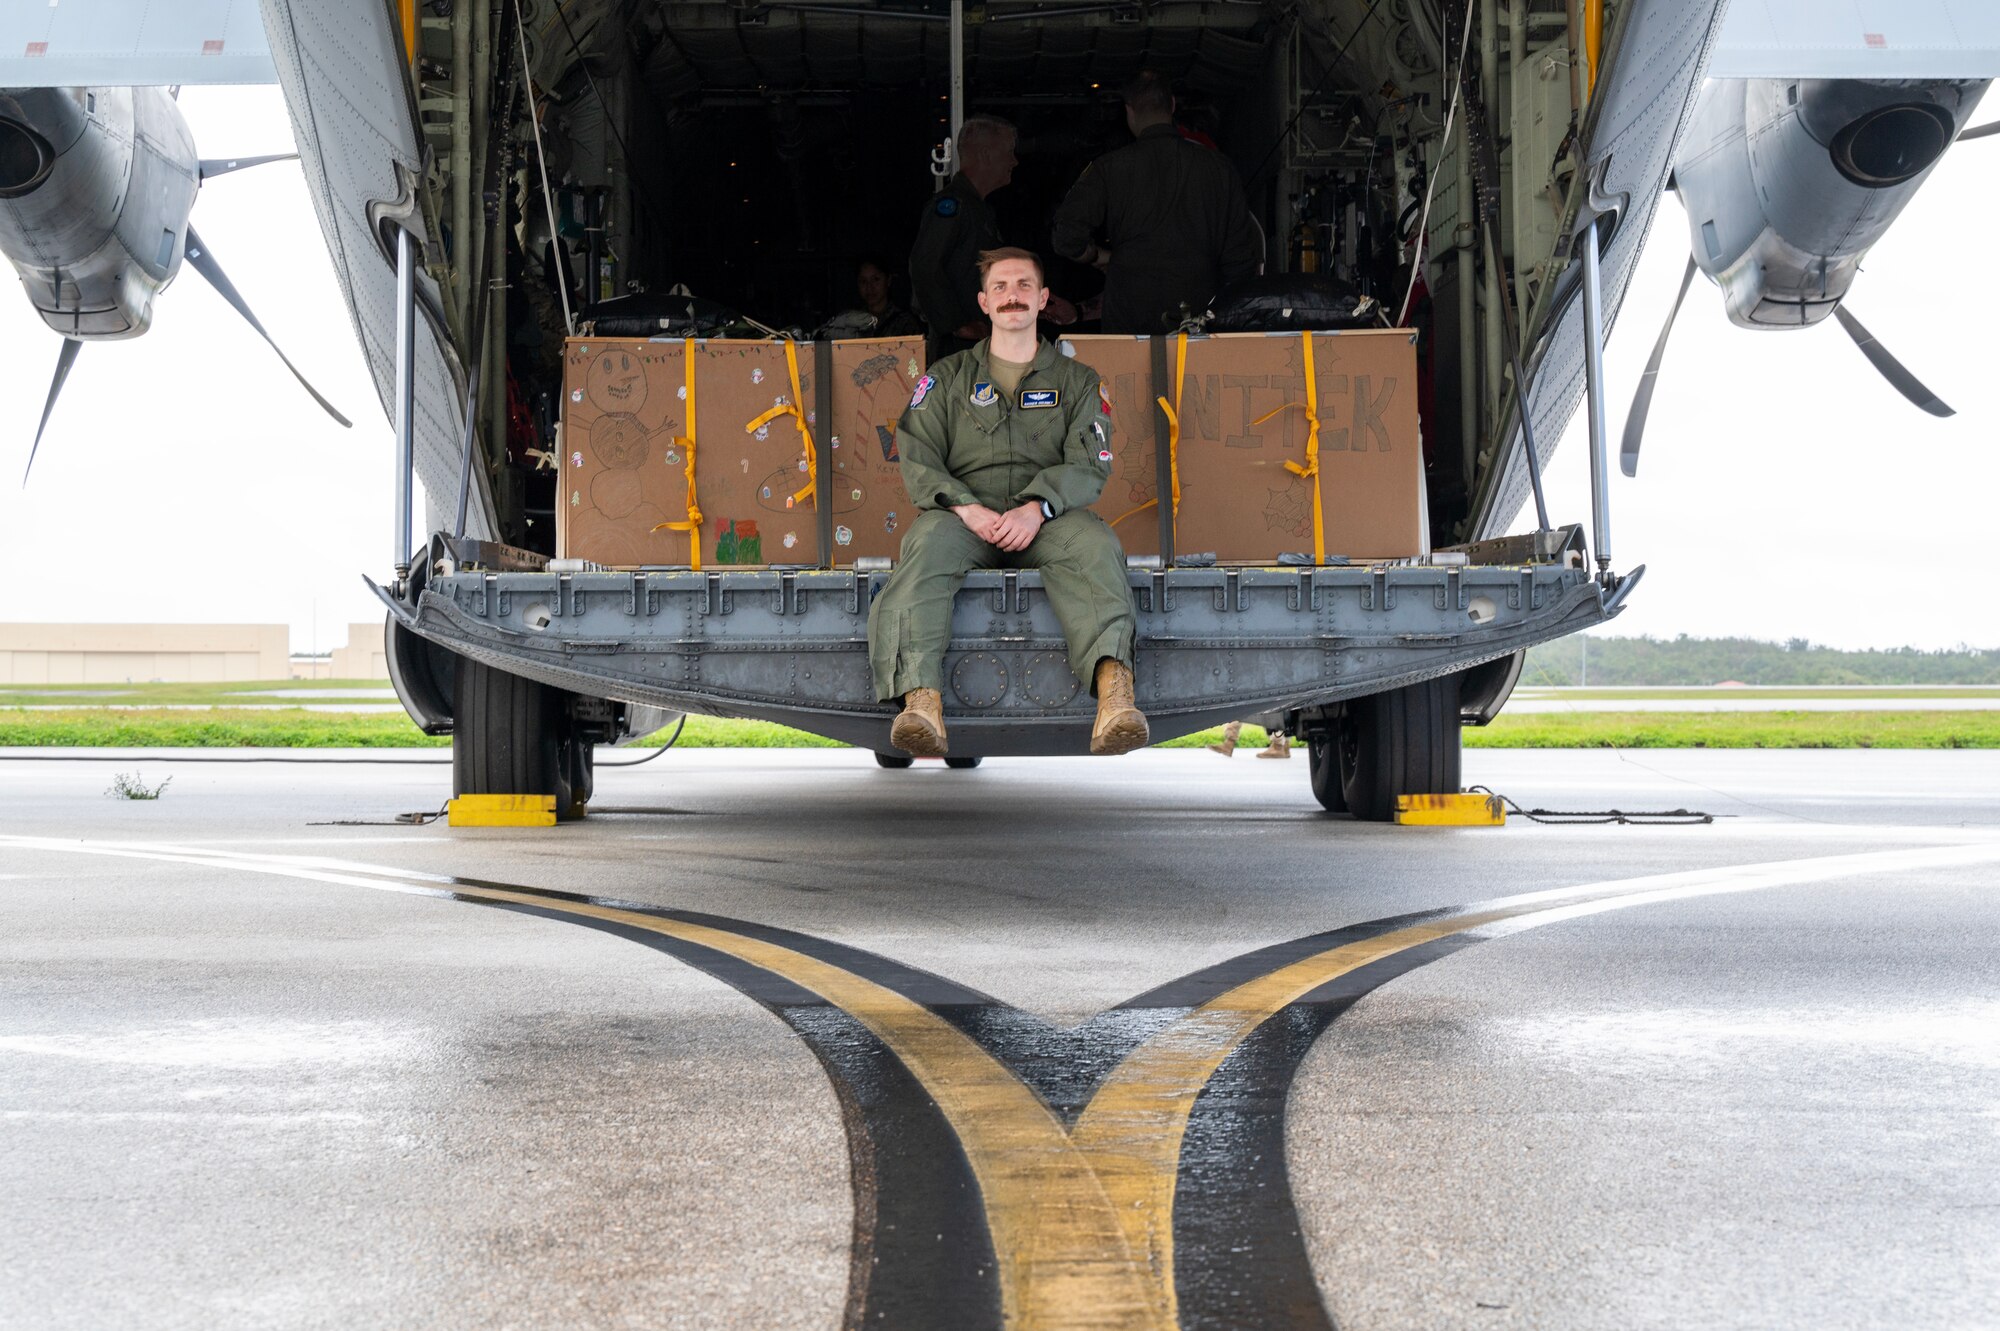 Photo of U.S. Air Force Pilot sitting on the back of a C-130J loaded with bundles for Operation Christmas Drop